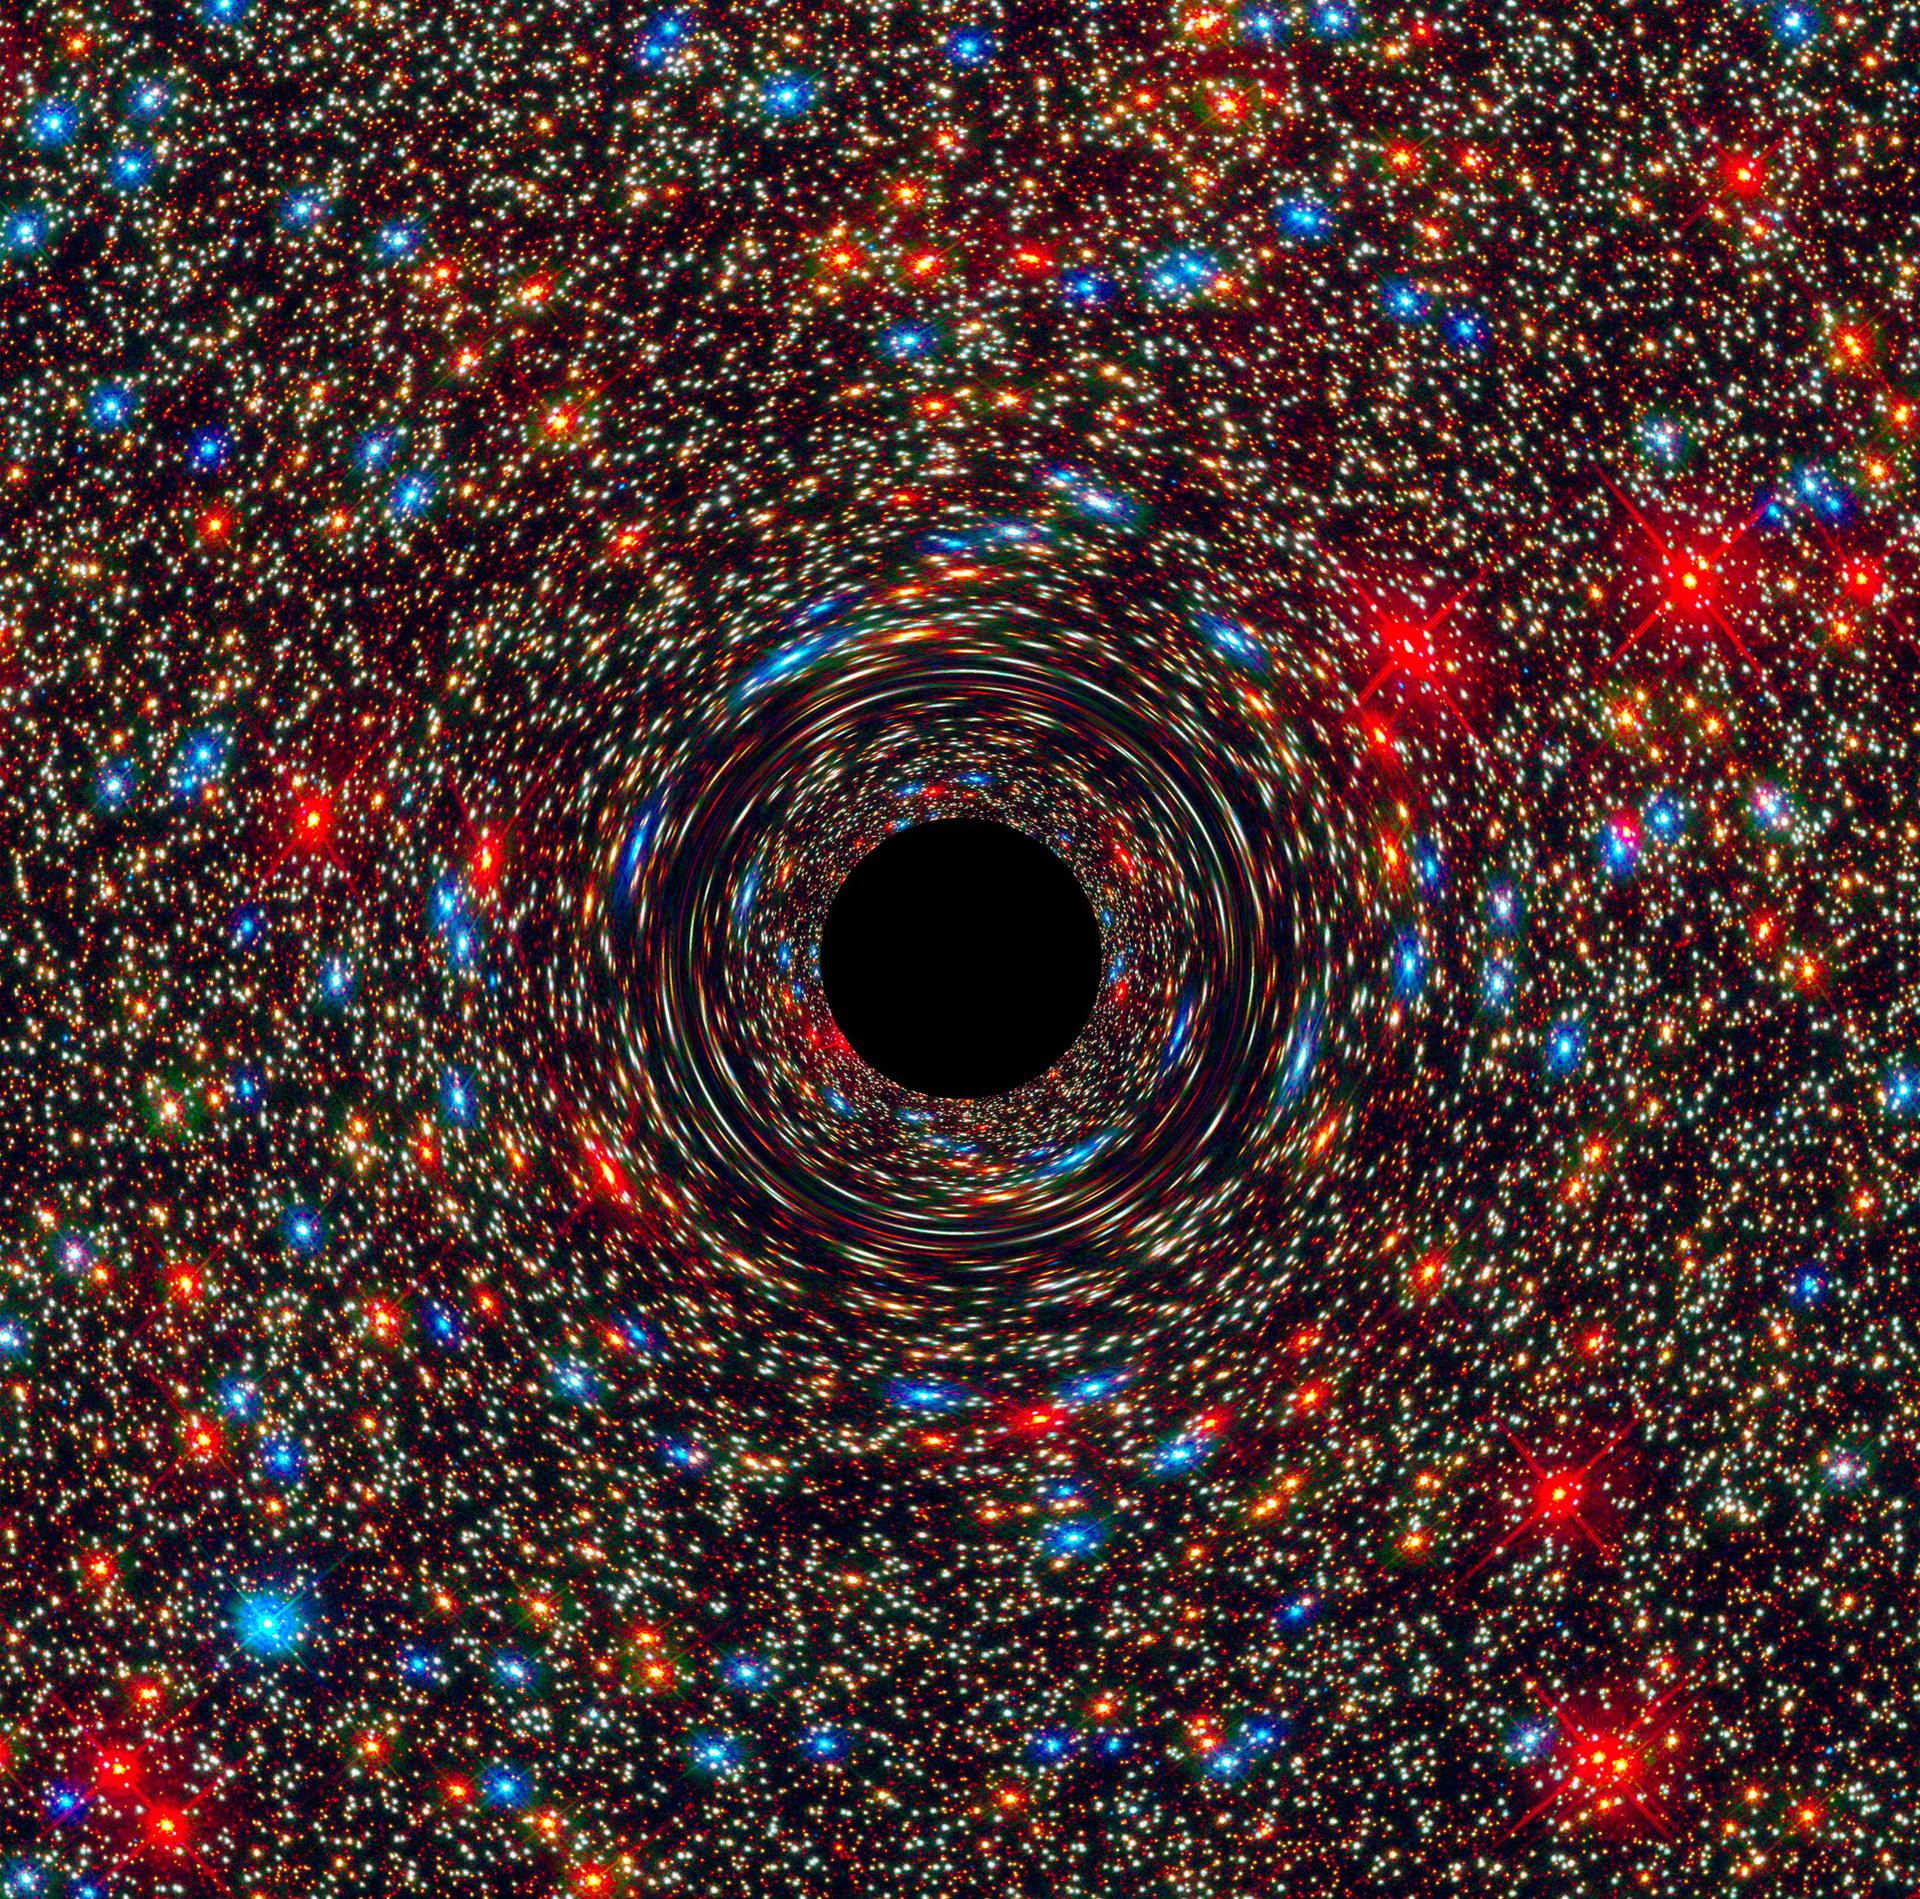 A computer simulation of a supermassive black hole at the center of a galaxy